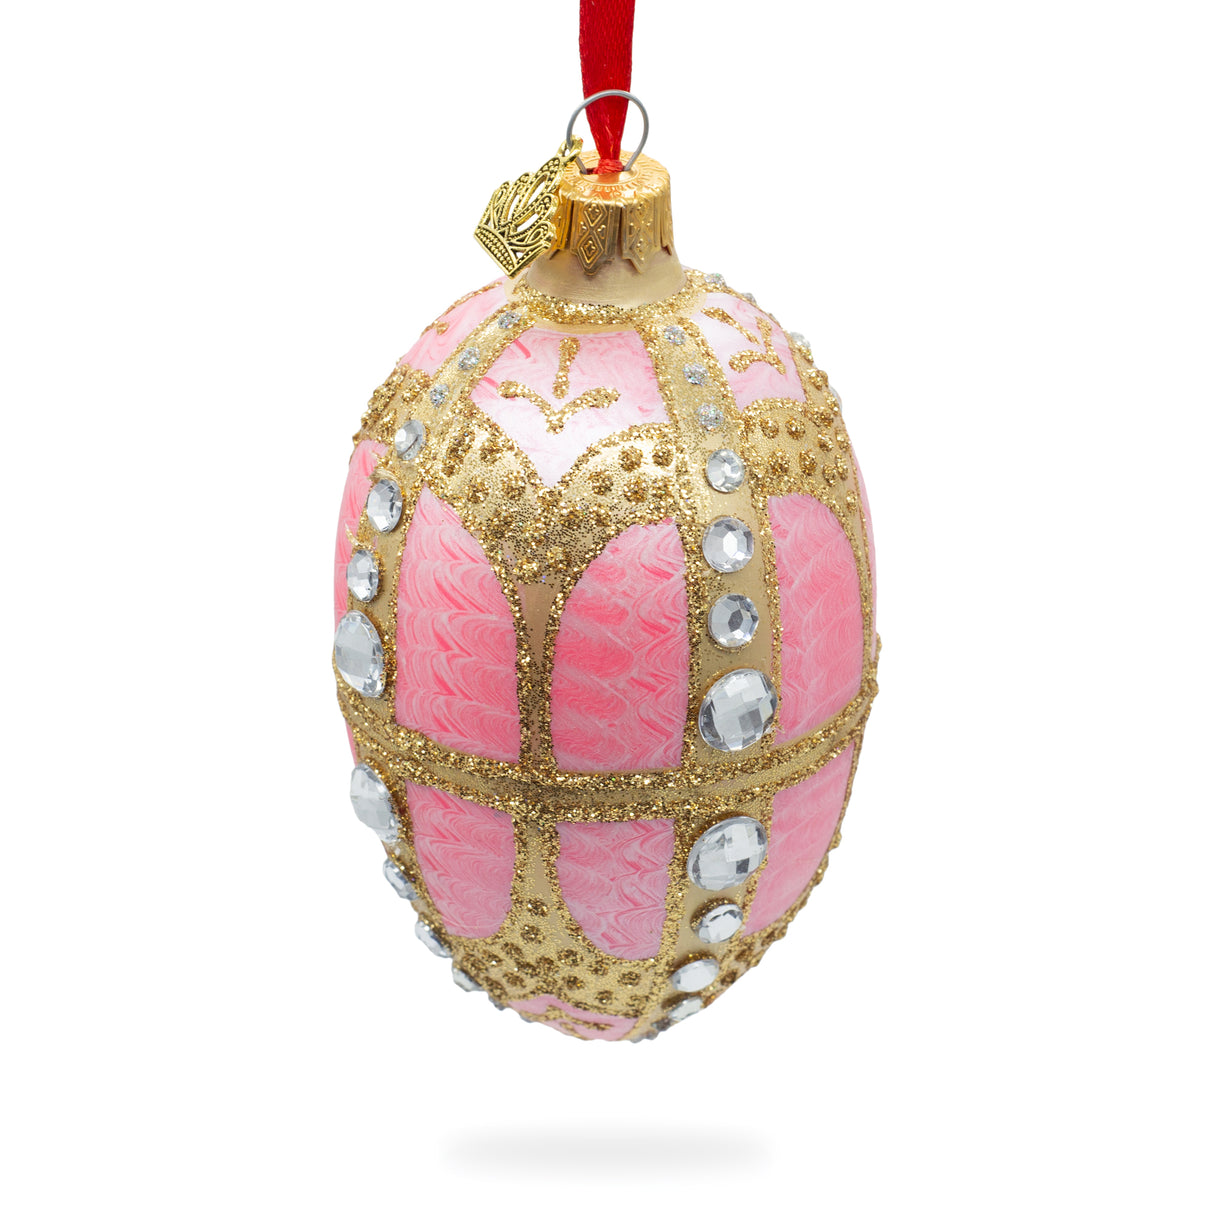 BestPysanky online gift shop sells mouth blown hand made painted xmas decor decorations unique luxury collectible heirloom vintage whimsical elegant festive balls baubles old fashioned european german collection artisan hanging pendants personalized oval